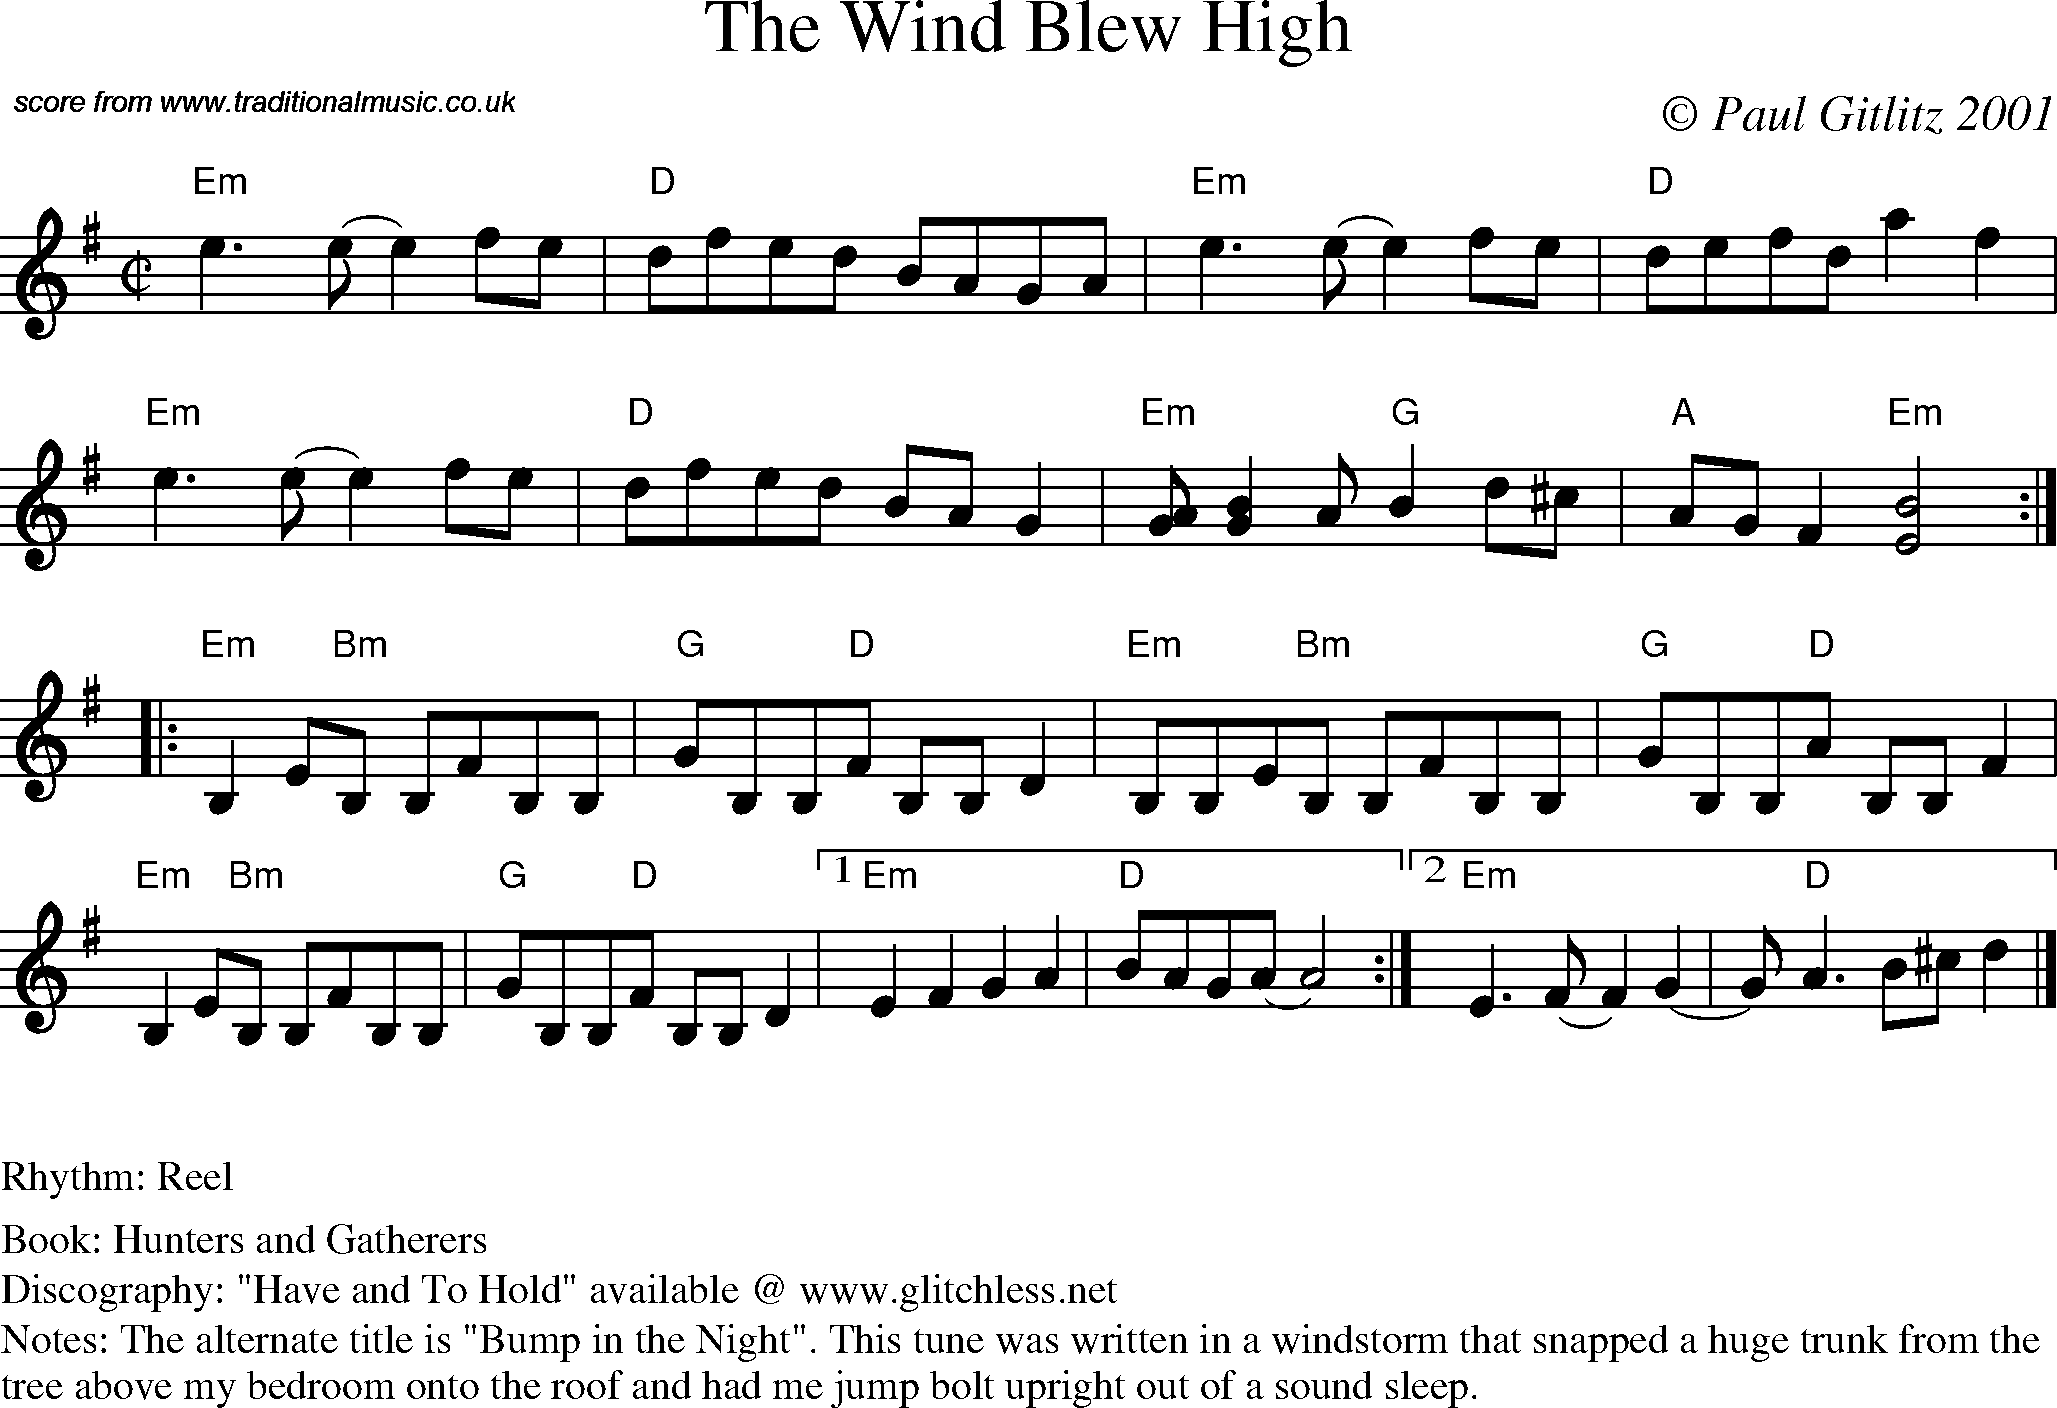 Sheet Music Score for Reel - The Wind Blew High